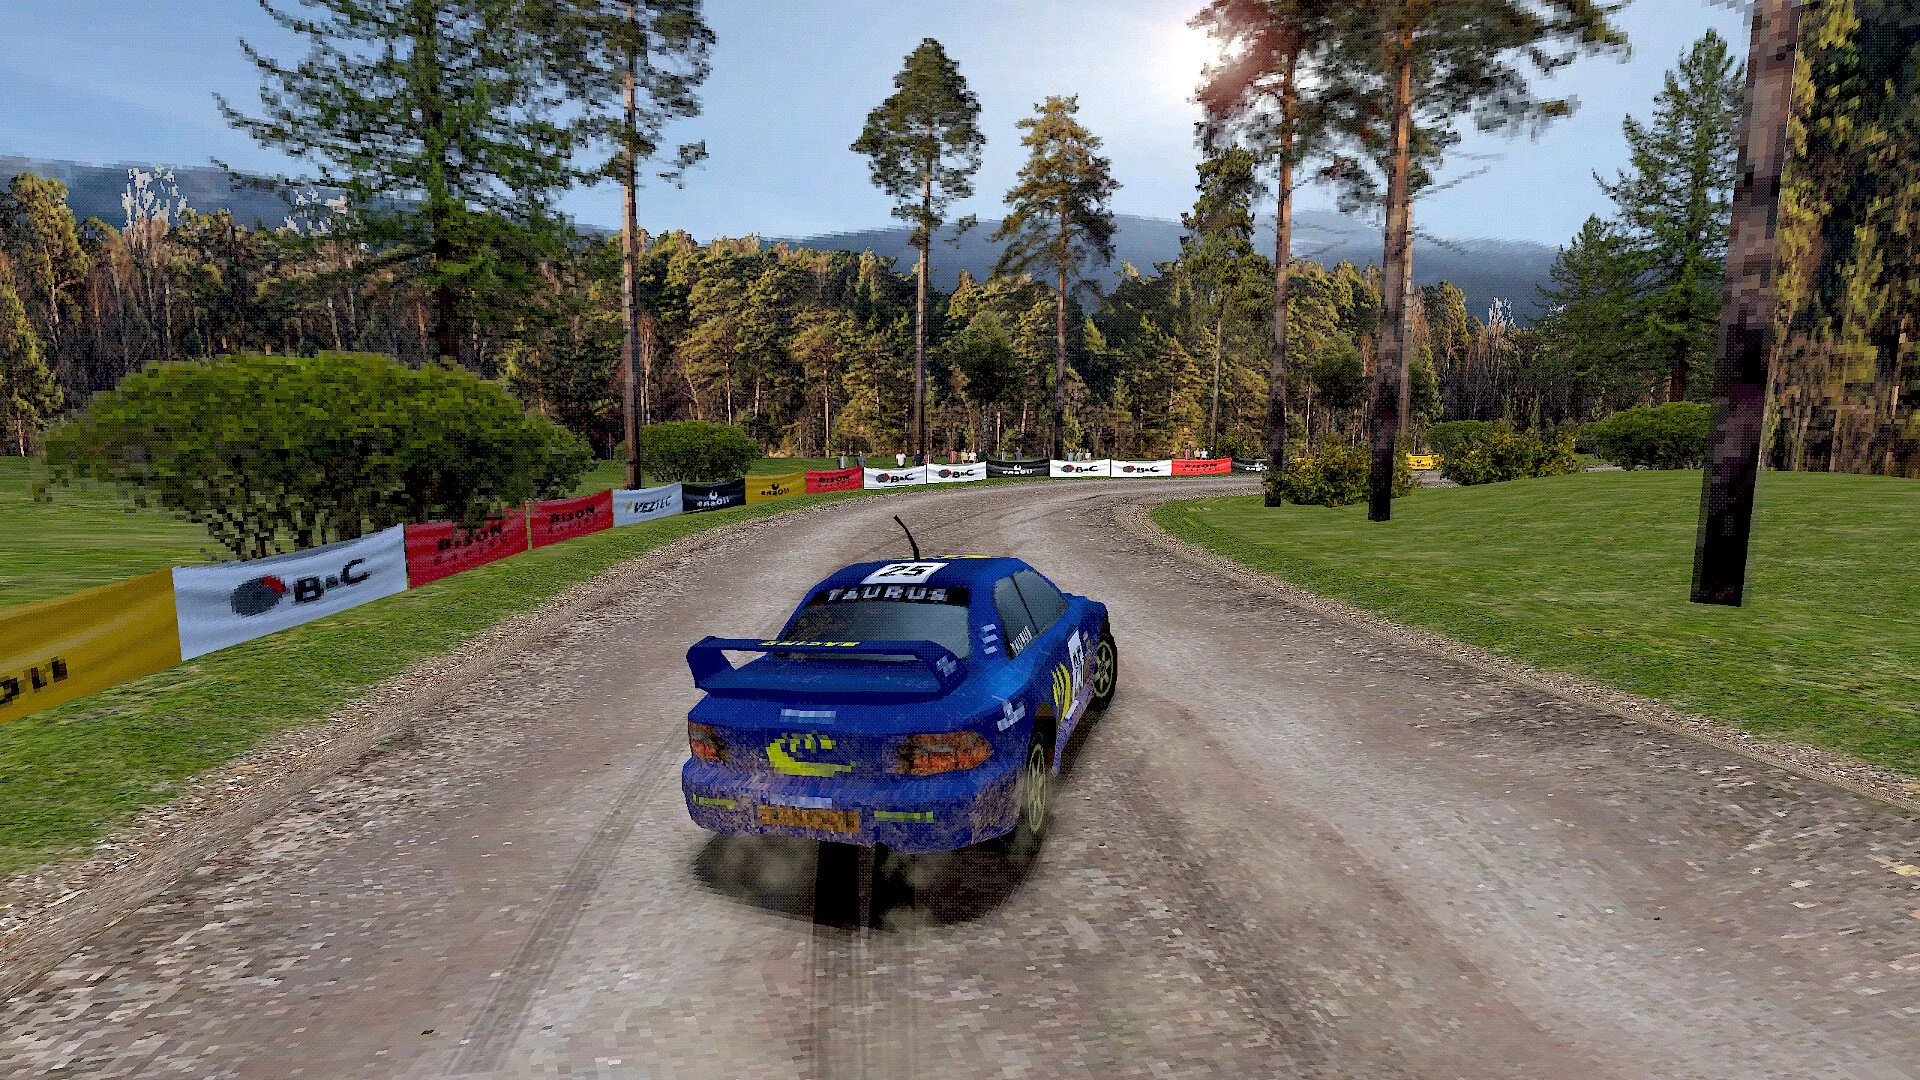 An old-school rally racing game inspired by PlayStation 1 games is coming to Steam